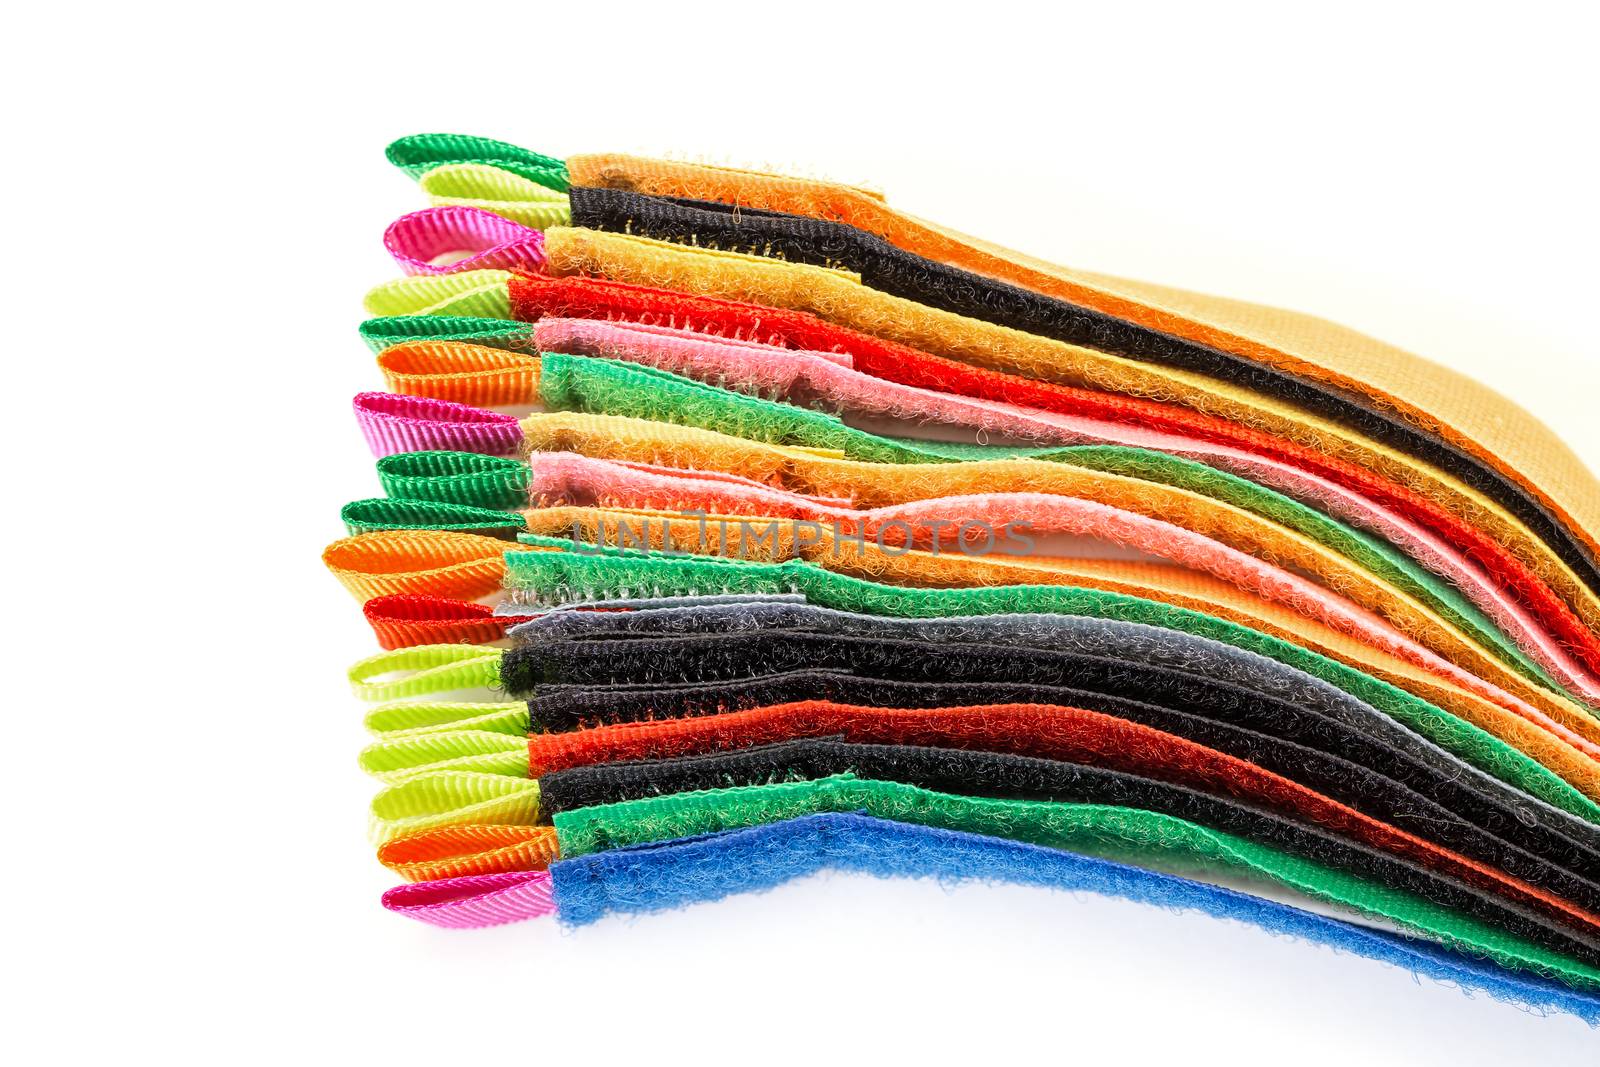 Pack of Colorful Velcro Strips by Discovod